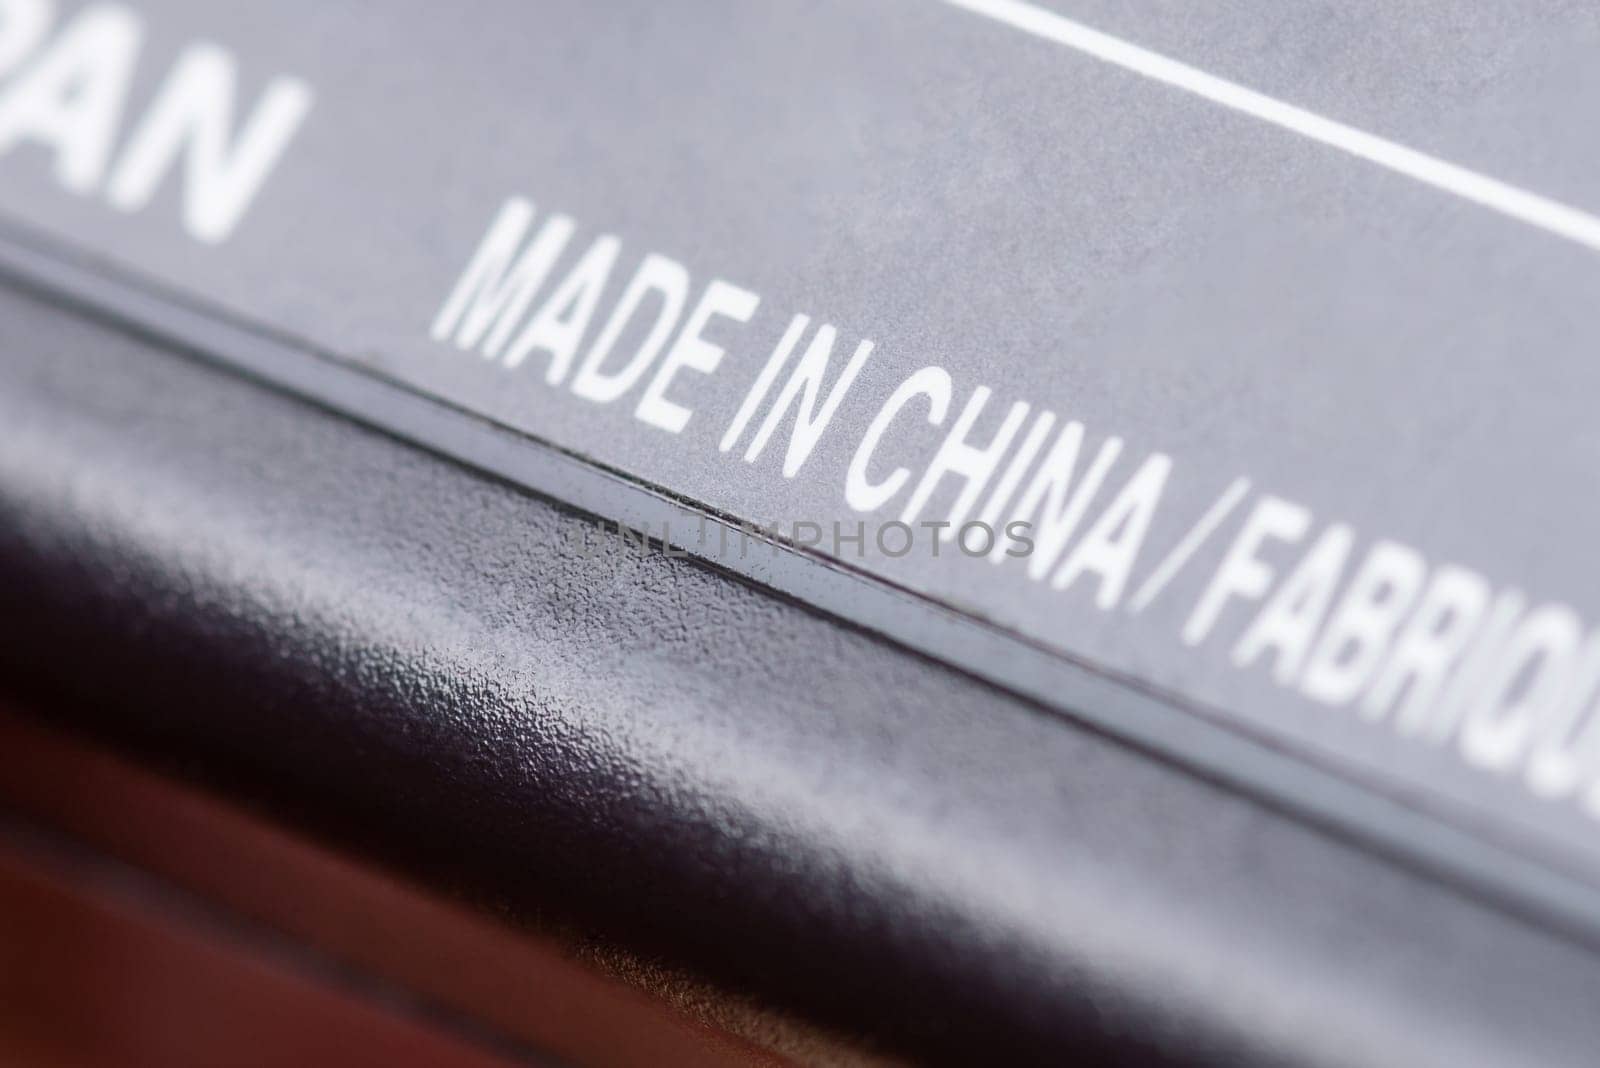 Made in China inscription on some electric appliance by VitaliiPetrushenko